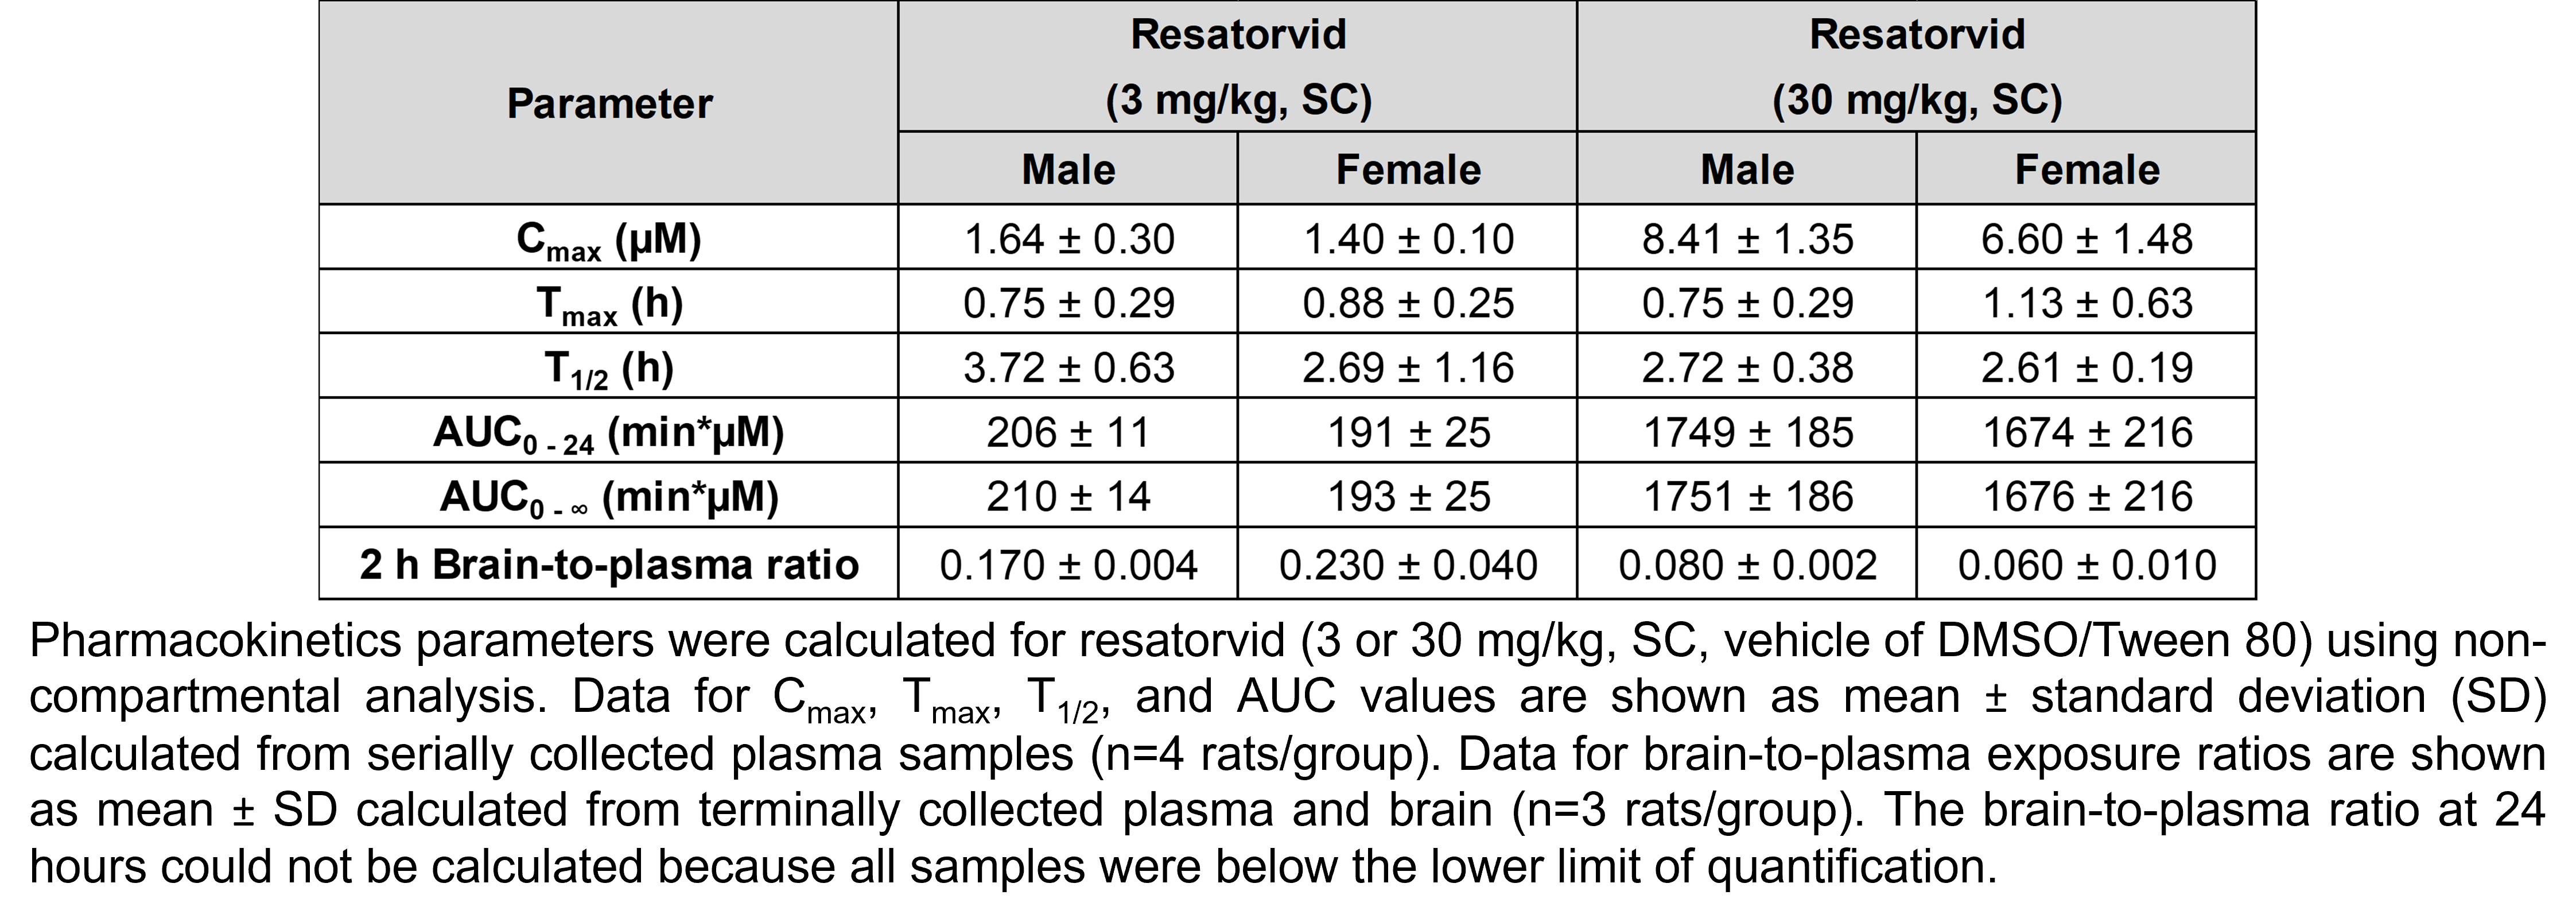 A table shows pharmacokinetics parameters calculated for resatorvid using non-compartmental analysis in male and female rats treated with resatorvid (3 or 30 mg/kg, SC, vehicle of DMSO/Tween 80). The means for the 4 groups (males and females treated with 3 mg/kg resatorvid and males and females treated with 30 mg/kg resatorvid, respectively) are as follows. The highest concentration (Cmax) was 1.64, 1.4, 8.41, and 6.6 µM; the time at the maximum concentration (Tmax) was 0.75, 0.88, 0.75, and 1.13 hours; the half-life (T1/2) was 3.72, 2.69, 2.72, and 2.61 hours; area under the curve for time 0 to 24 hours was 206, 191, 1749, and 1674 minutes*µM; area under the curve for time 0 to infinity was 210, 193, 1751, and 1676 minutes*µM; the brain-to-plasma ratio at 2 hours was 0.17, 0.23, 0.08, and 0.06; the brain-to-plasma ratio at 24 hours could not be calculated because all samples were below the lower limit of quantification.